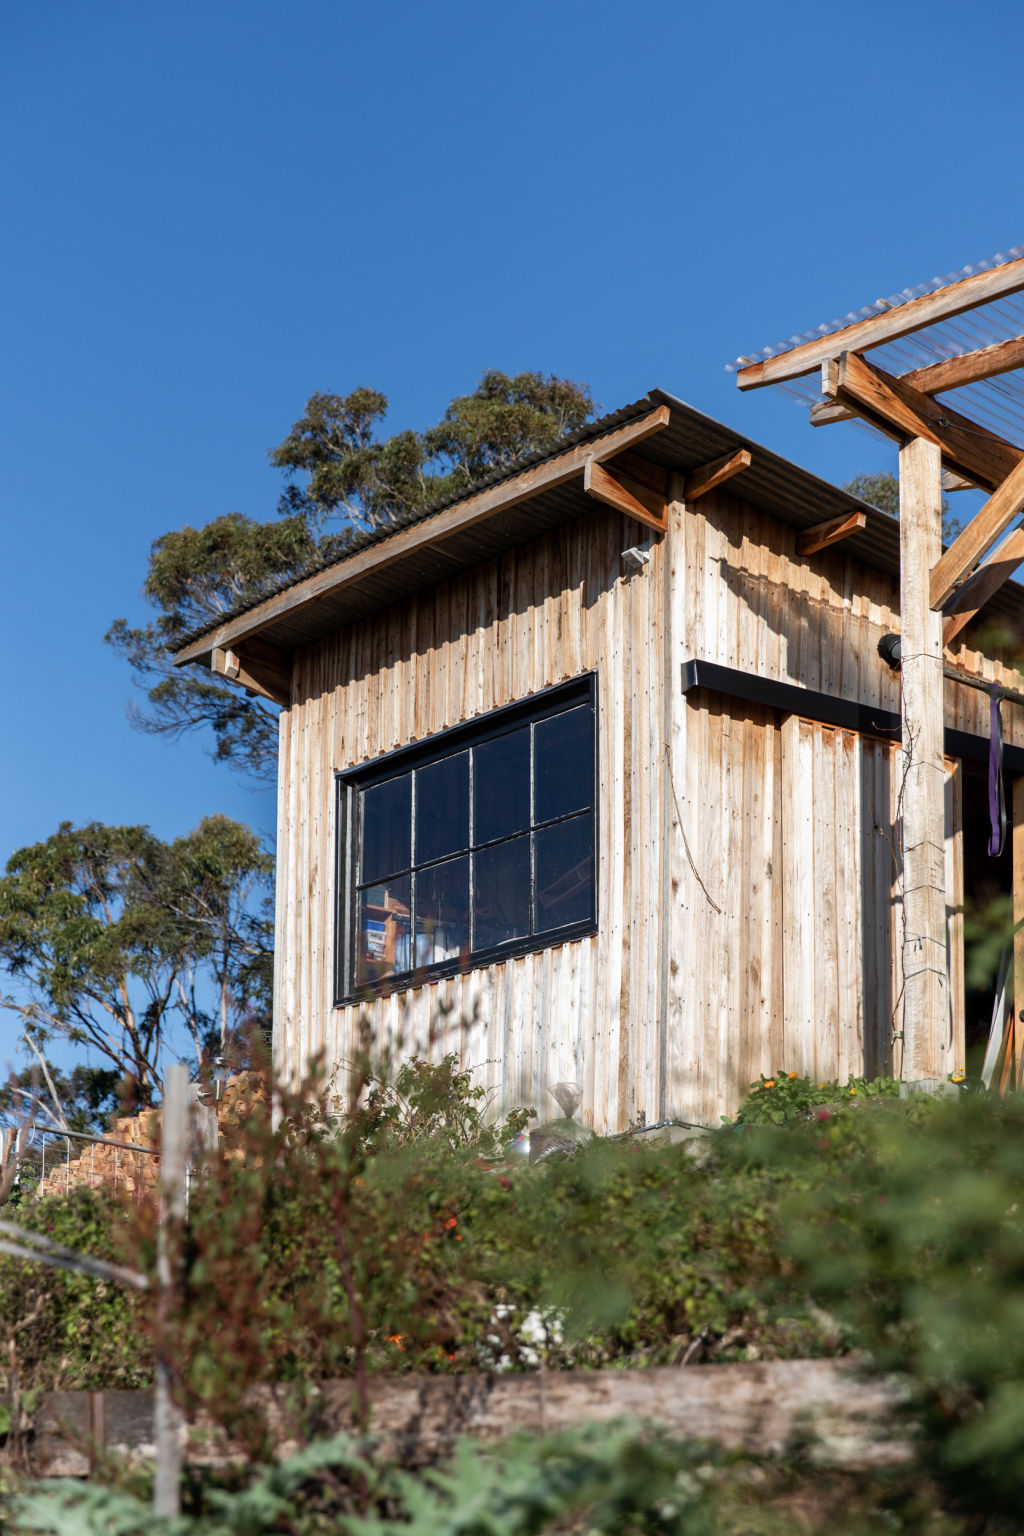 In 2020, the couple finished building a separate garden office made from local hardwood timber. Photo: NATASHA MULHALL